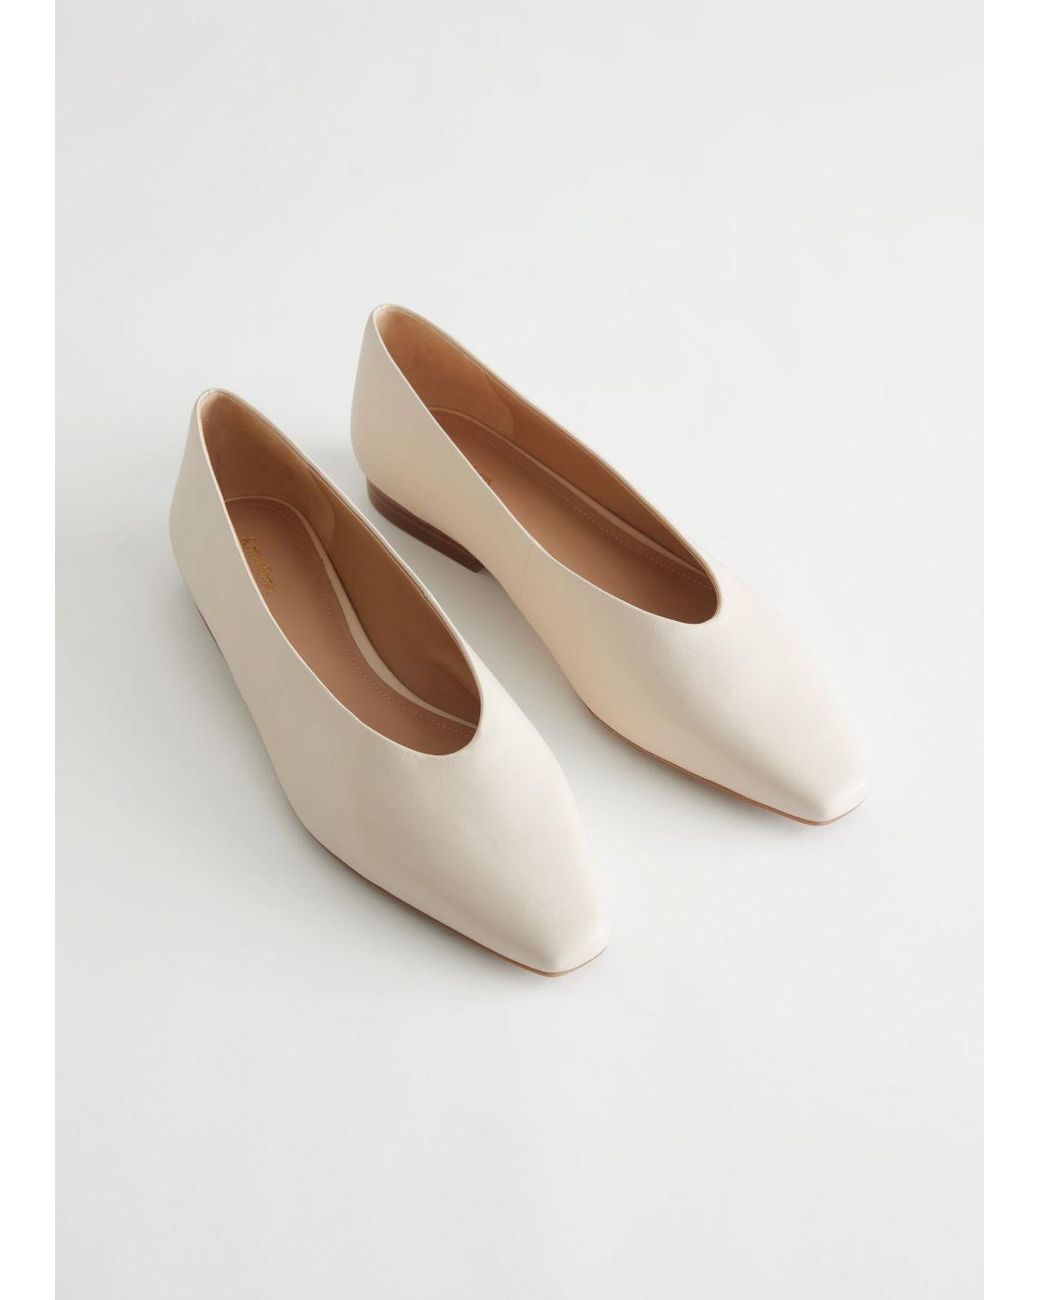 & Other Stories Pointed Leather Ballerina Flats in White - Lyst